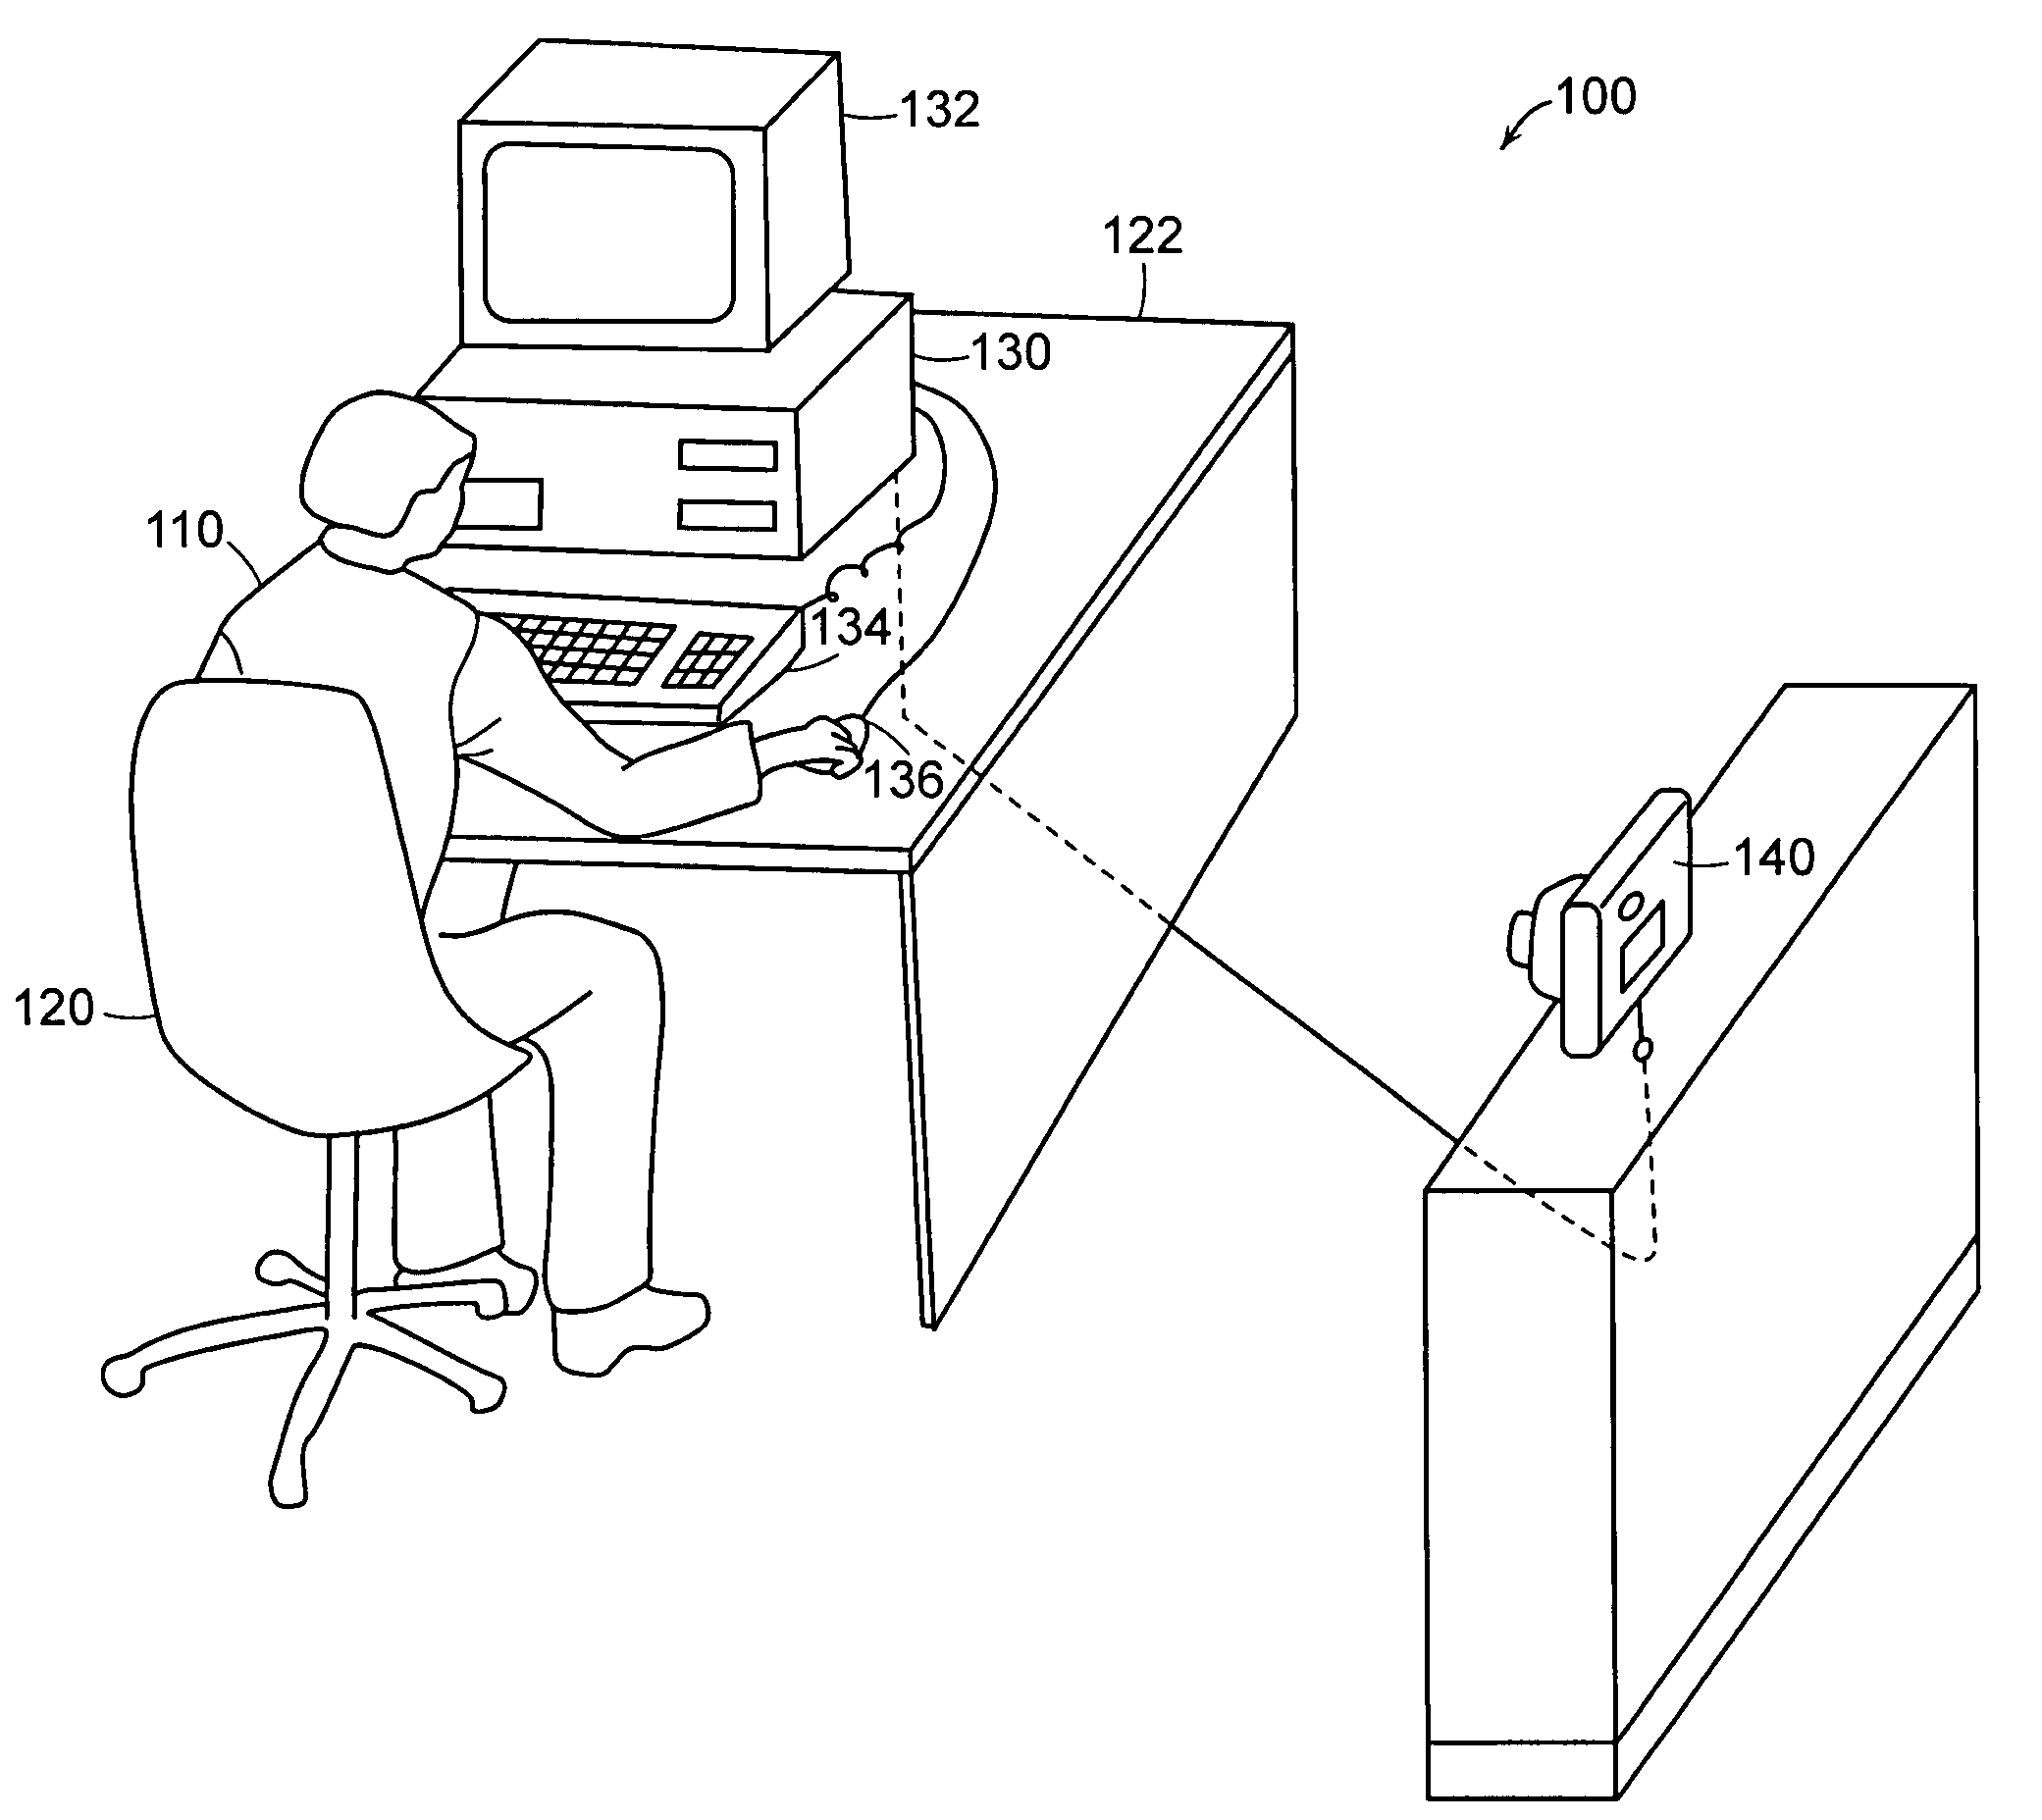 System and method for ergonomic tracking for individual physical exertion